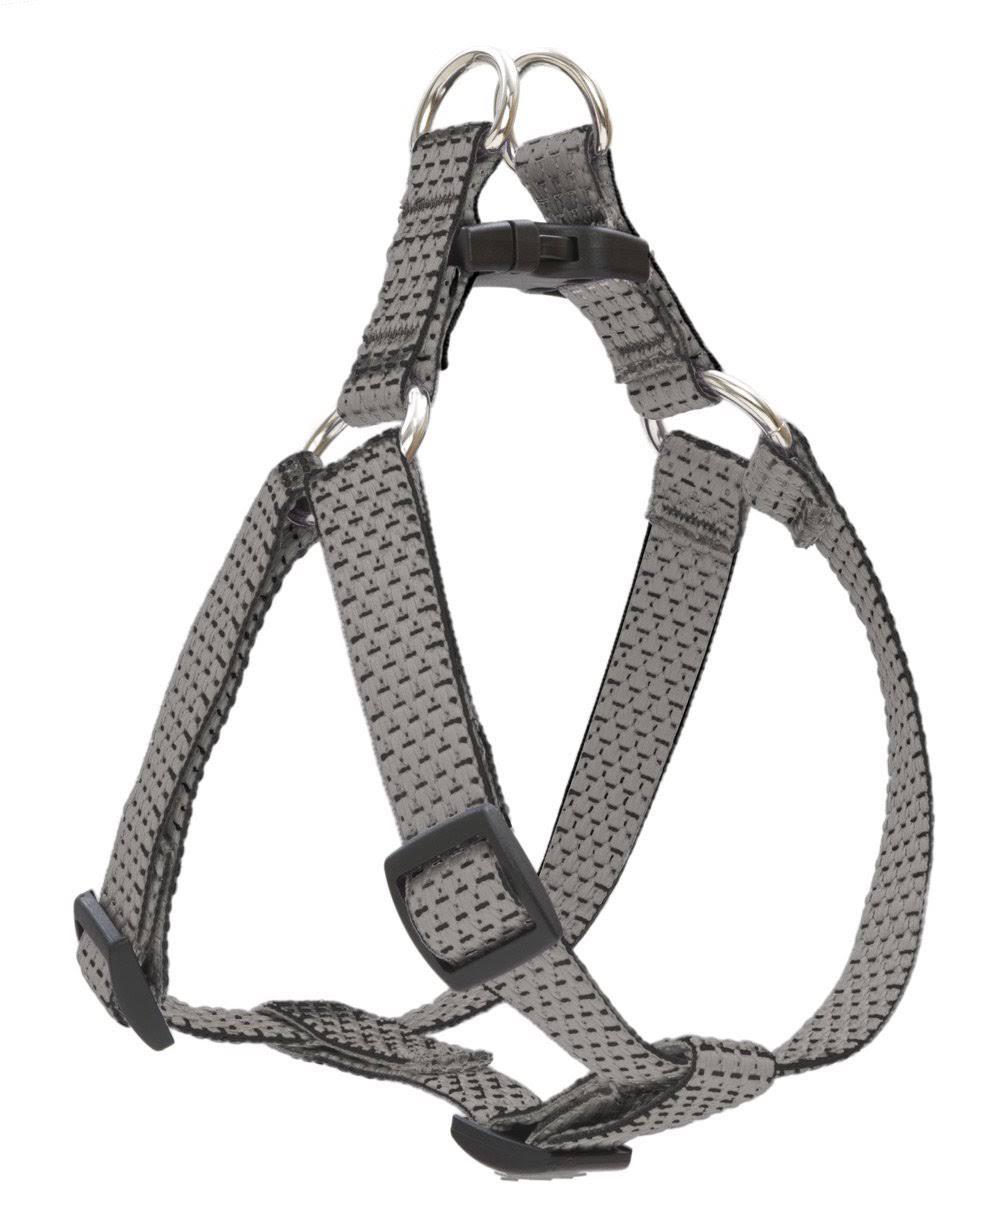 Lupine Eco Step in Small Dog Harness - Granite, 3/4" X 15-21"